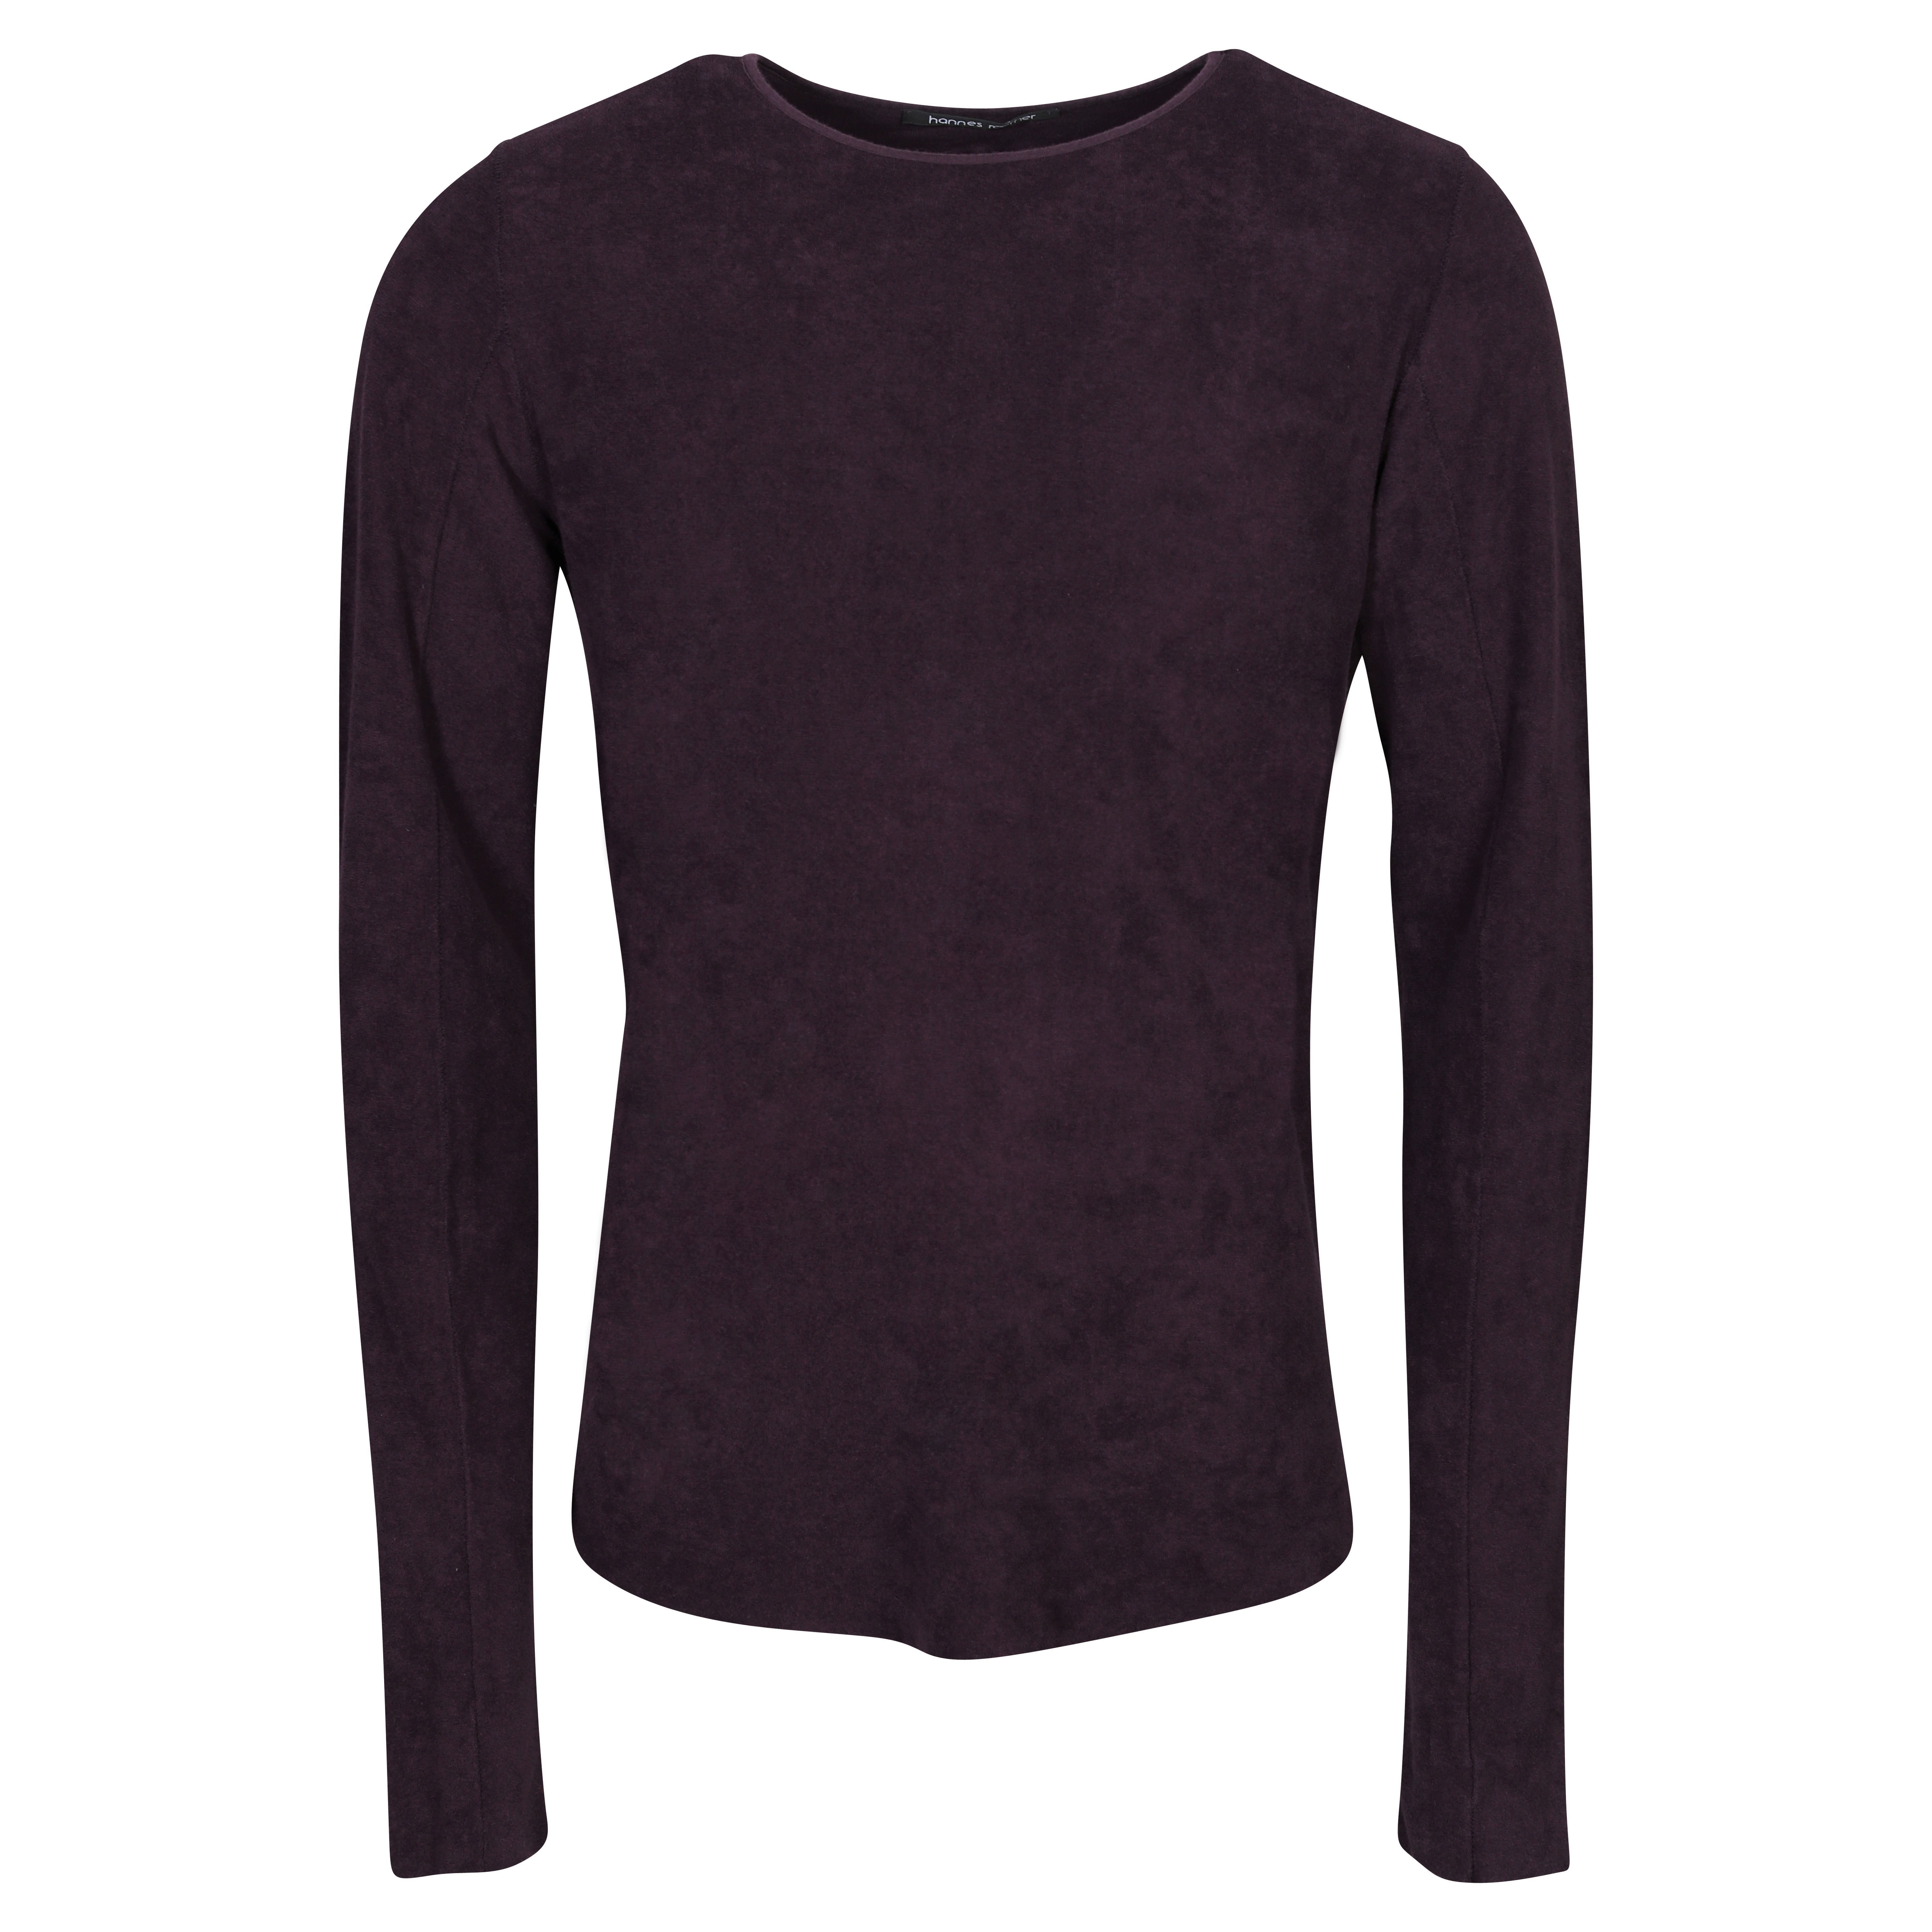 Hannes Roether Frottee Longsleeve in Aladin S